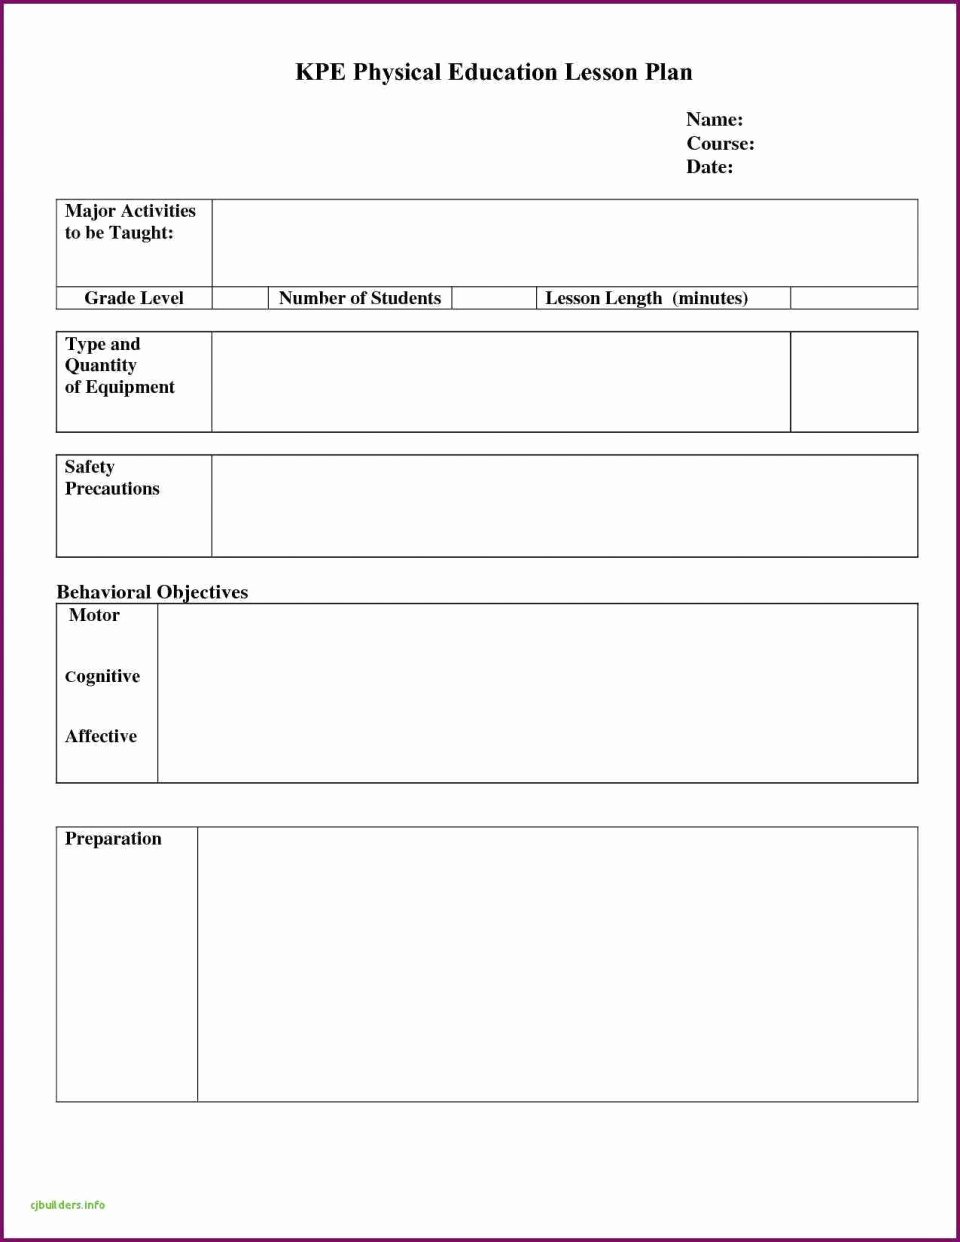 Blank Ubd Lesson Plan Template Best Of 009 Blank Ubd Lesson Plan Tinypetition